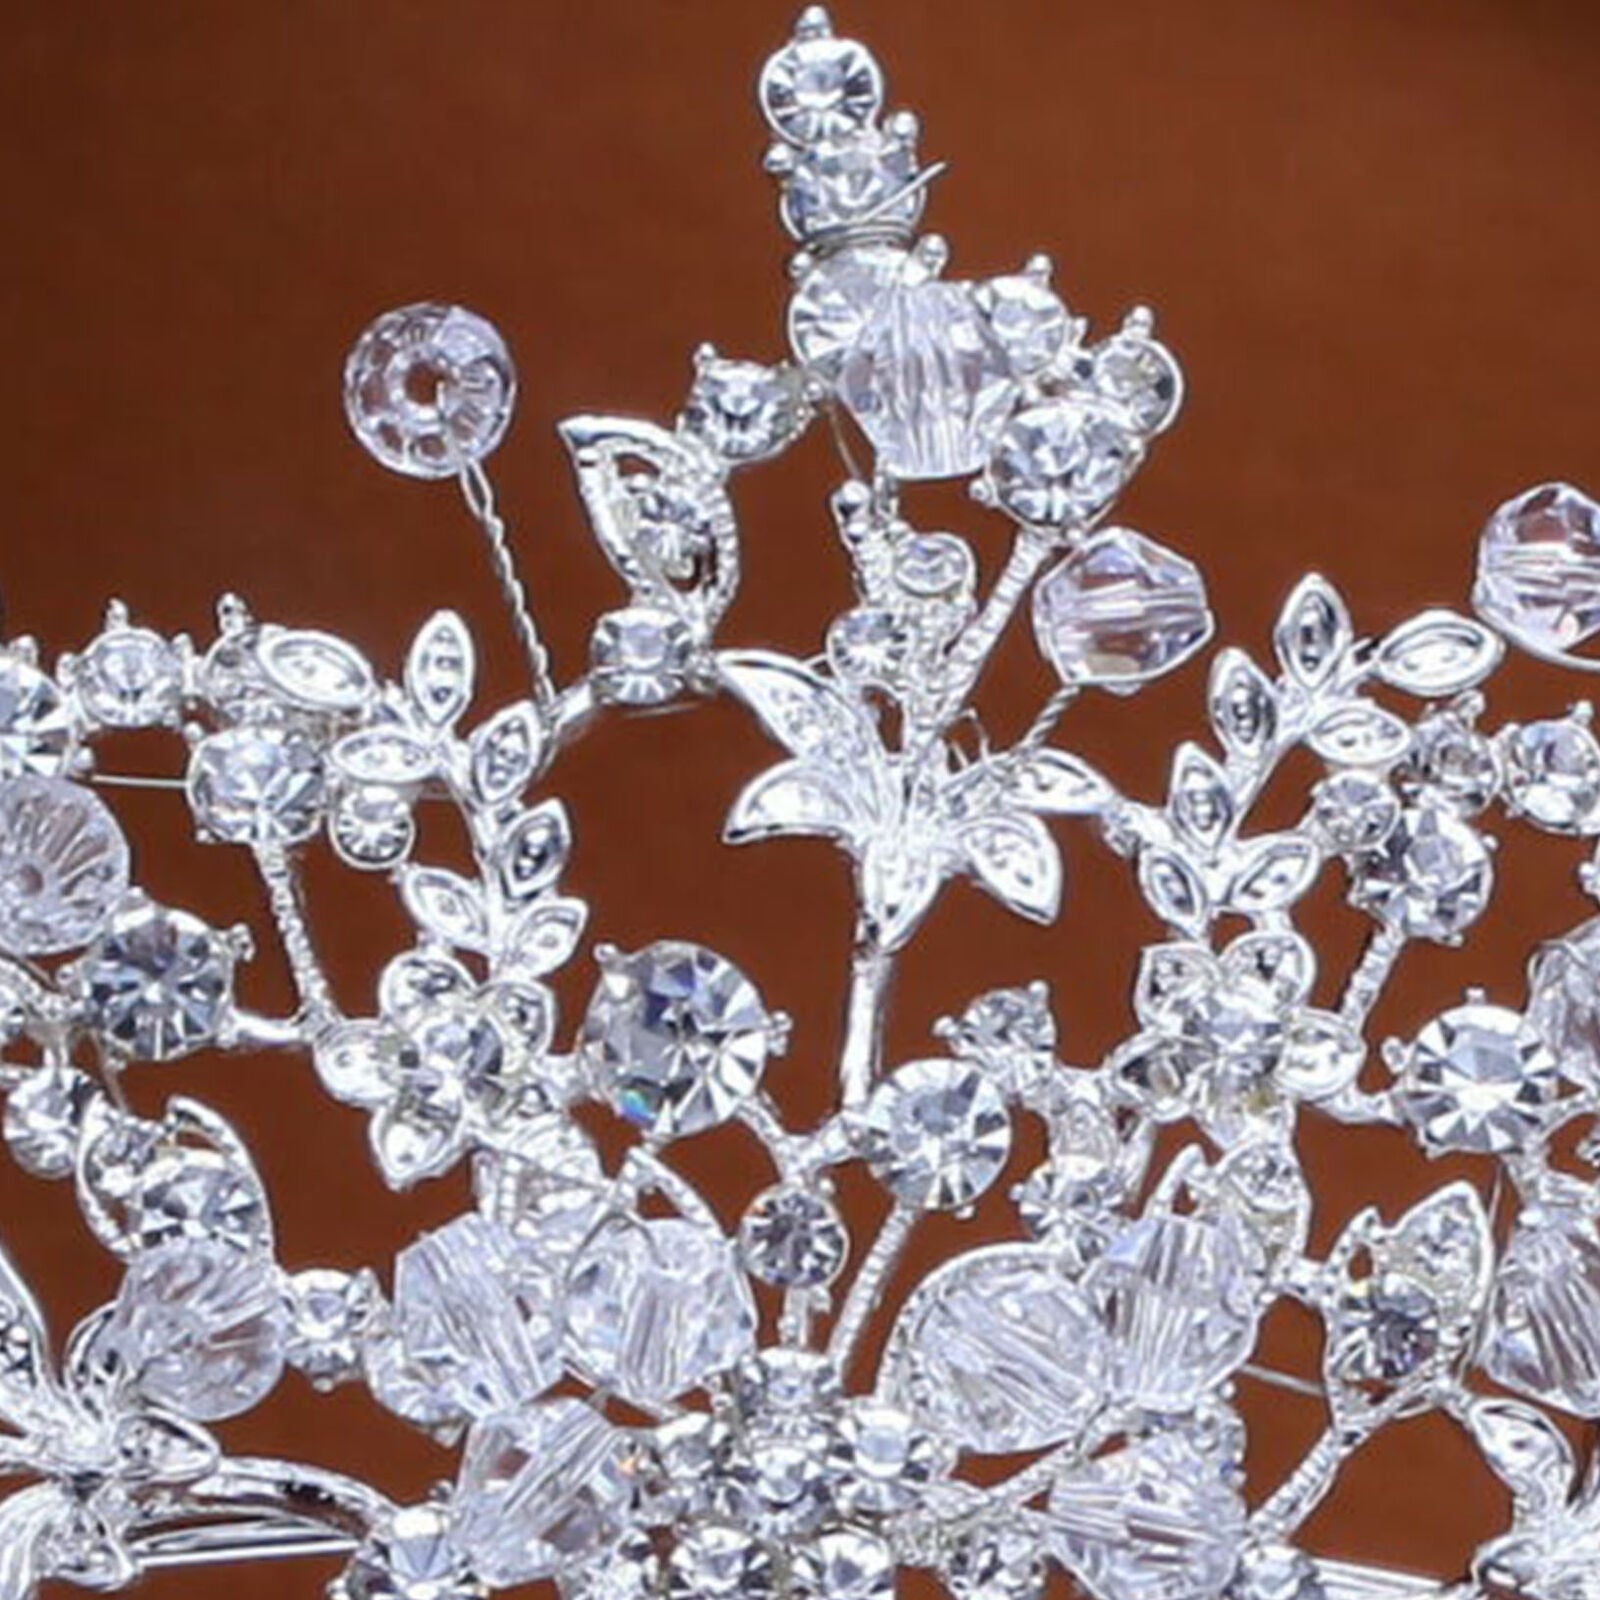 6cm High Little Flower Crystal Wedding Bridal Party Pageant Prom Tiara Crown